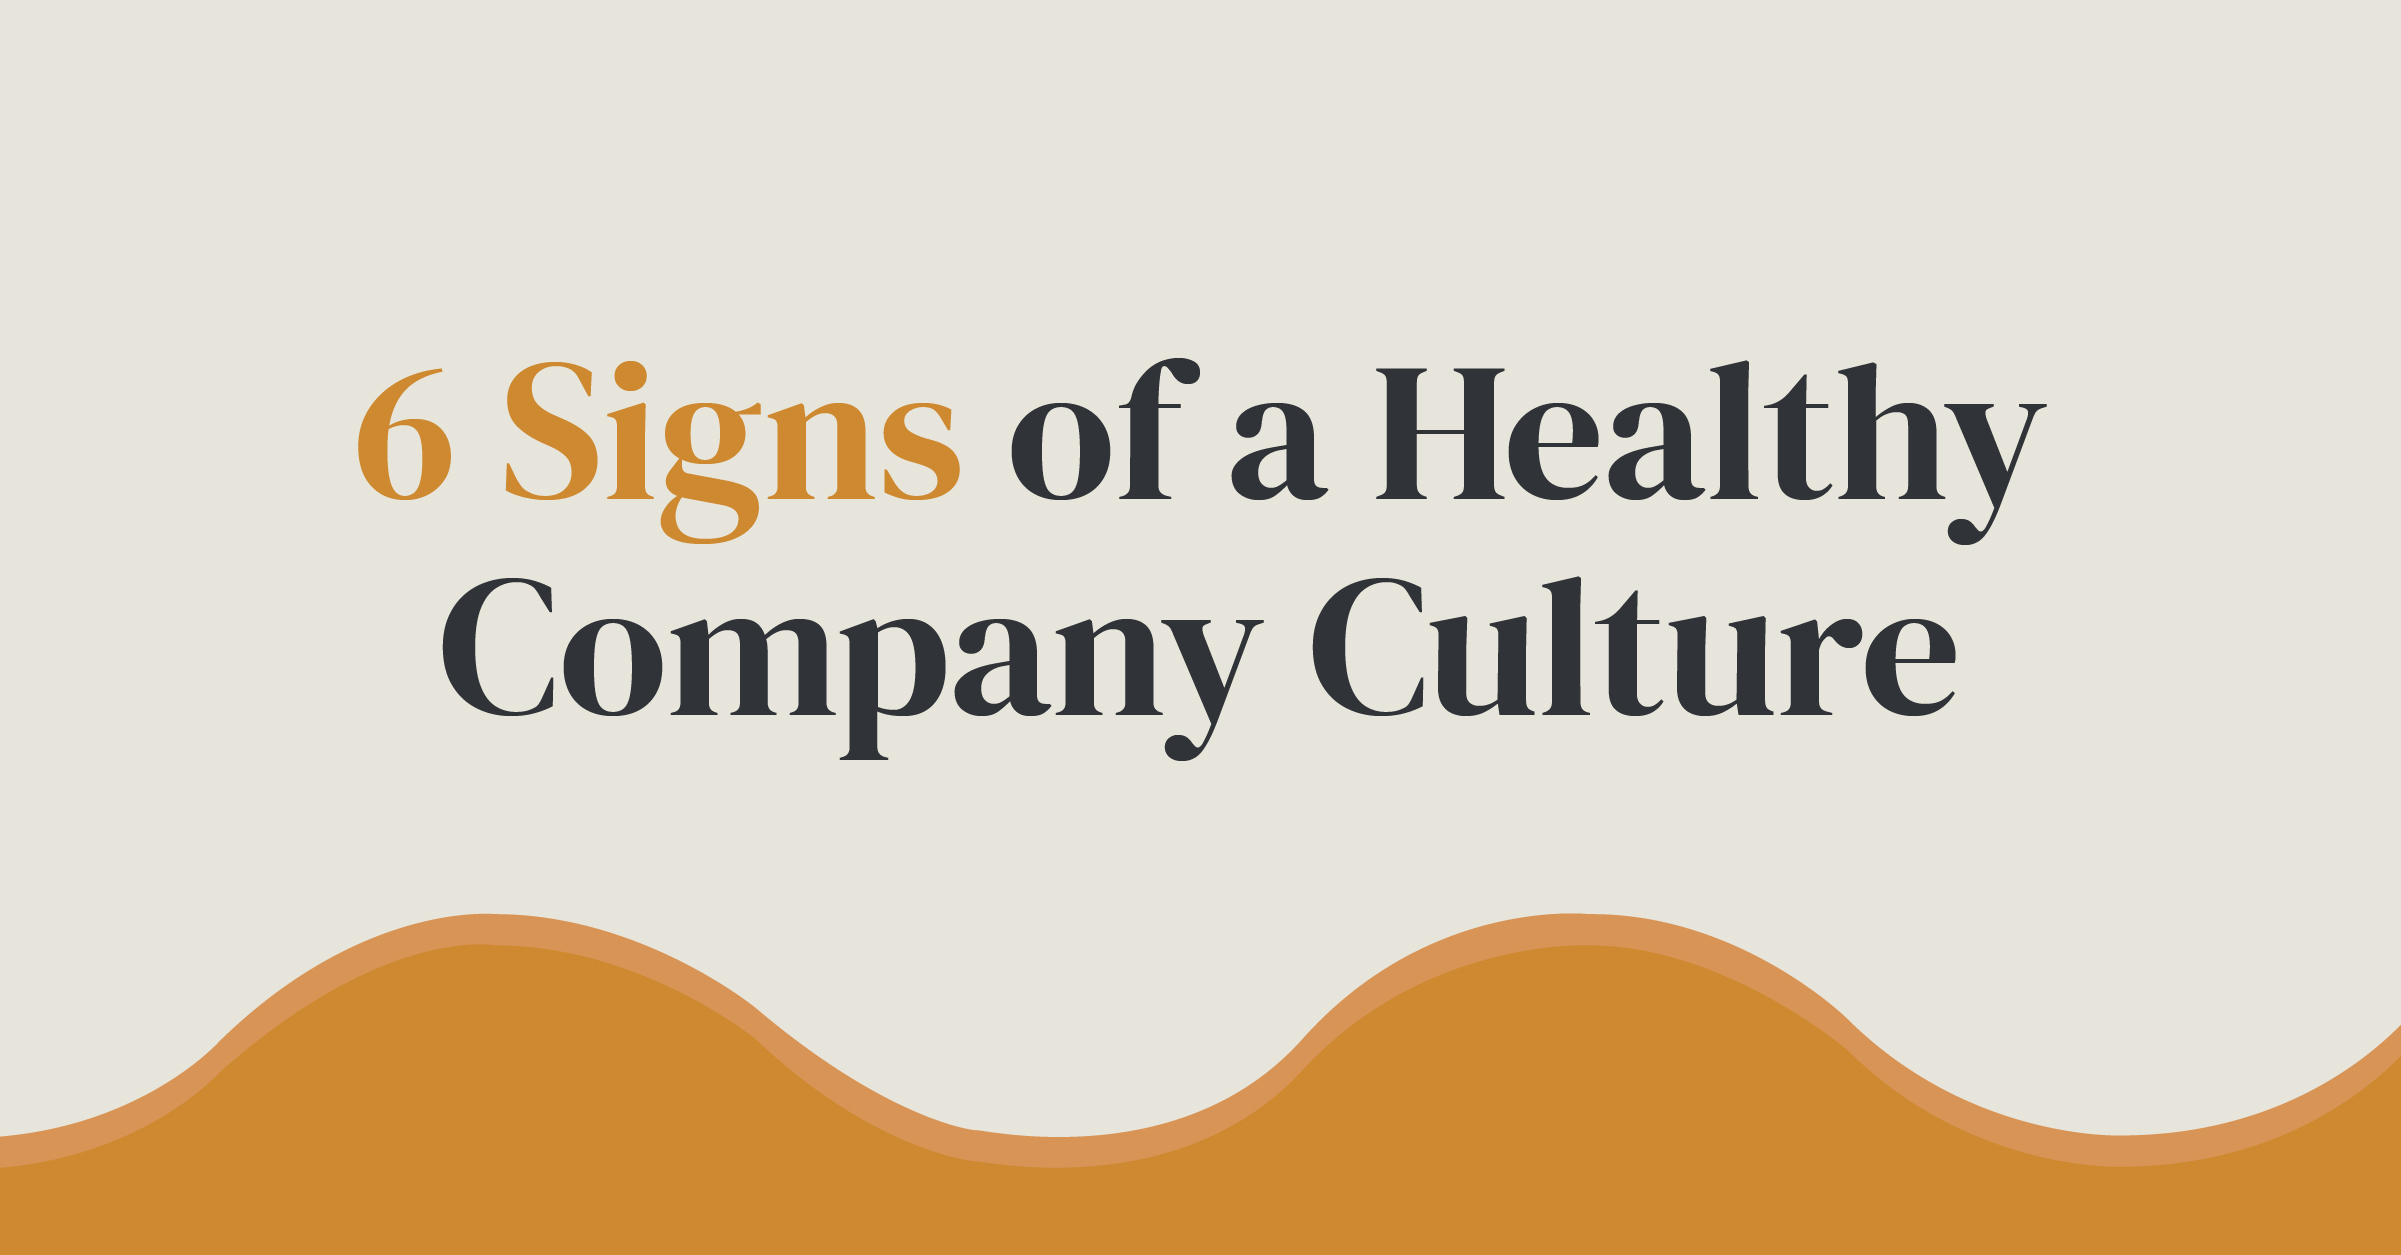 6 Signs of a Healthy Company Culture